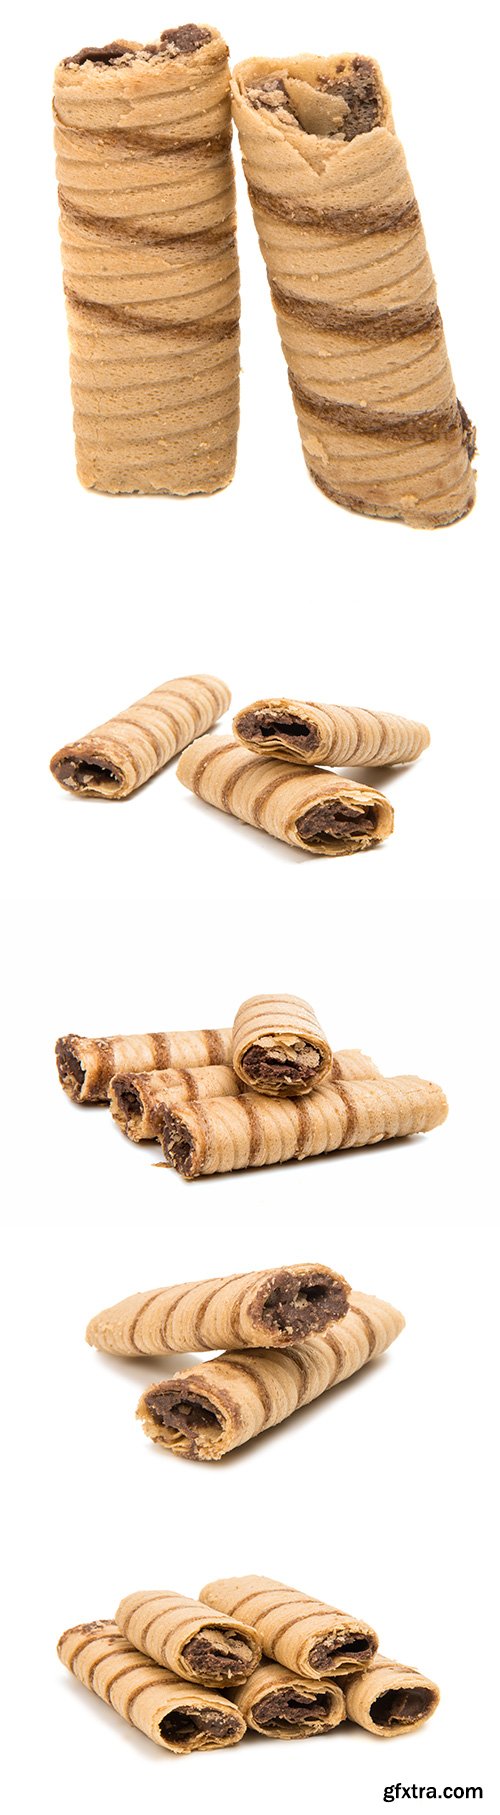 Wafer Rolls With Chocolate-1 Isolated - 11xJPGs